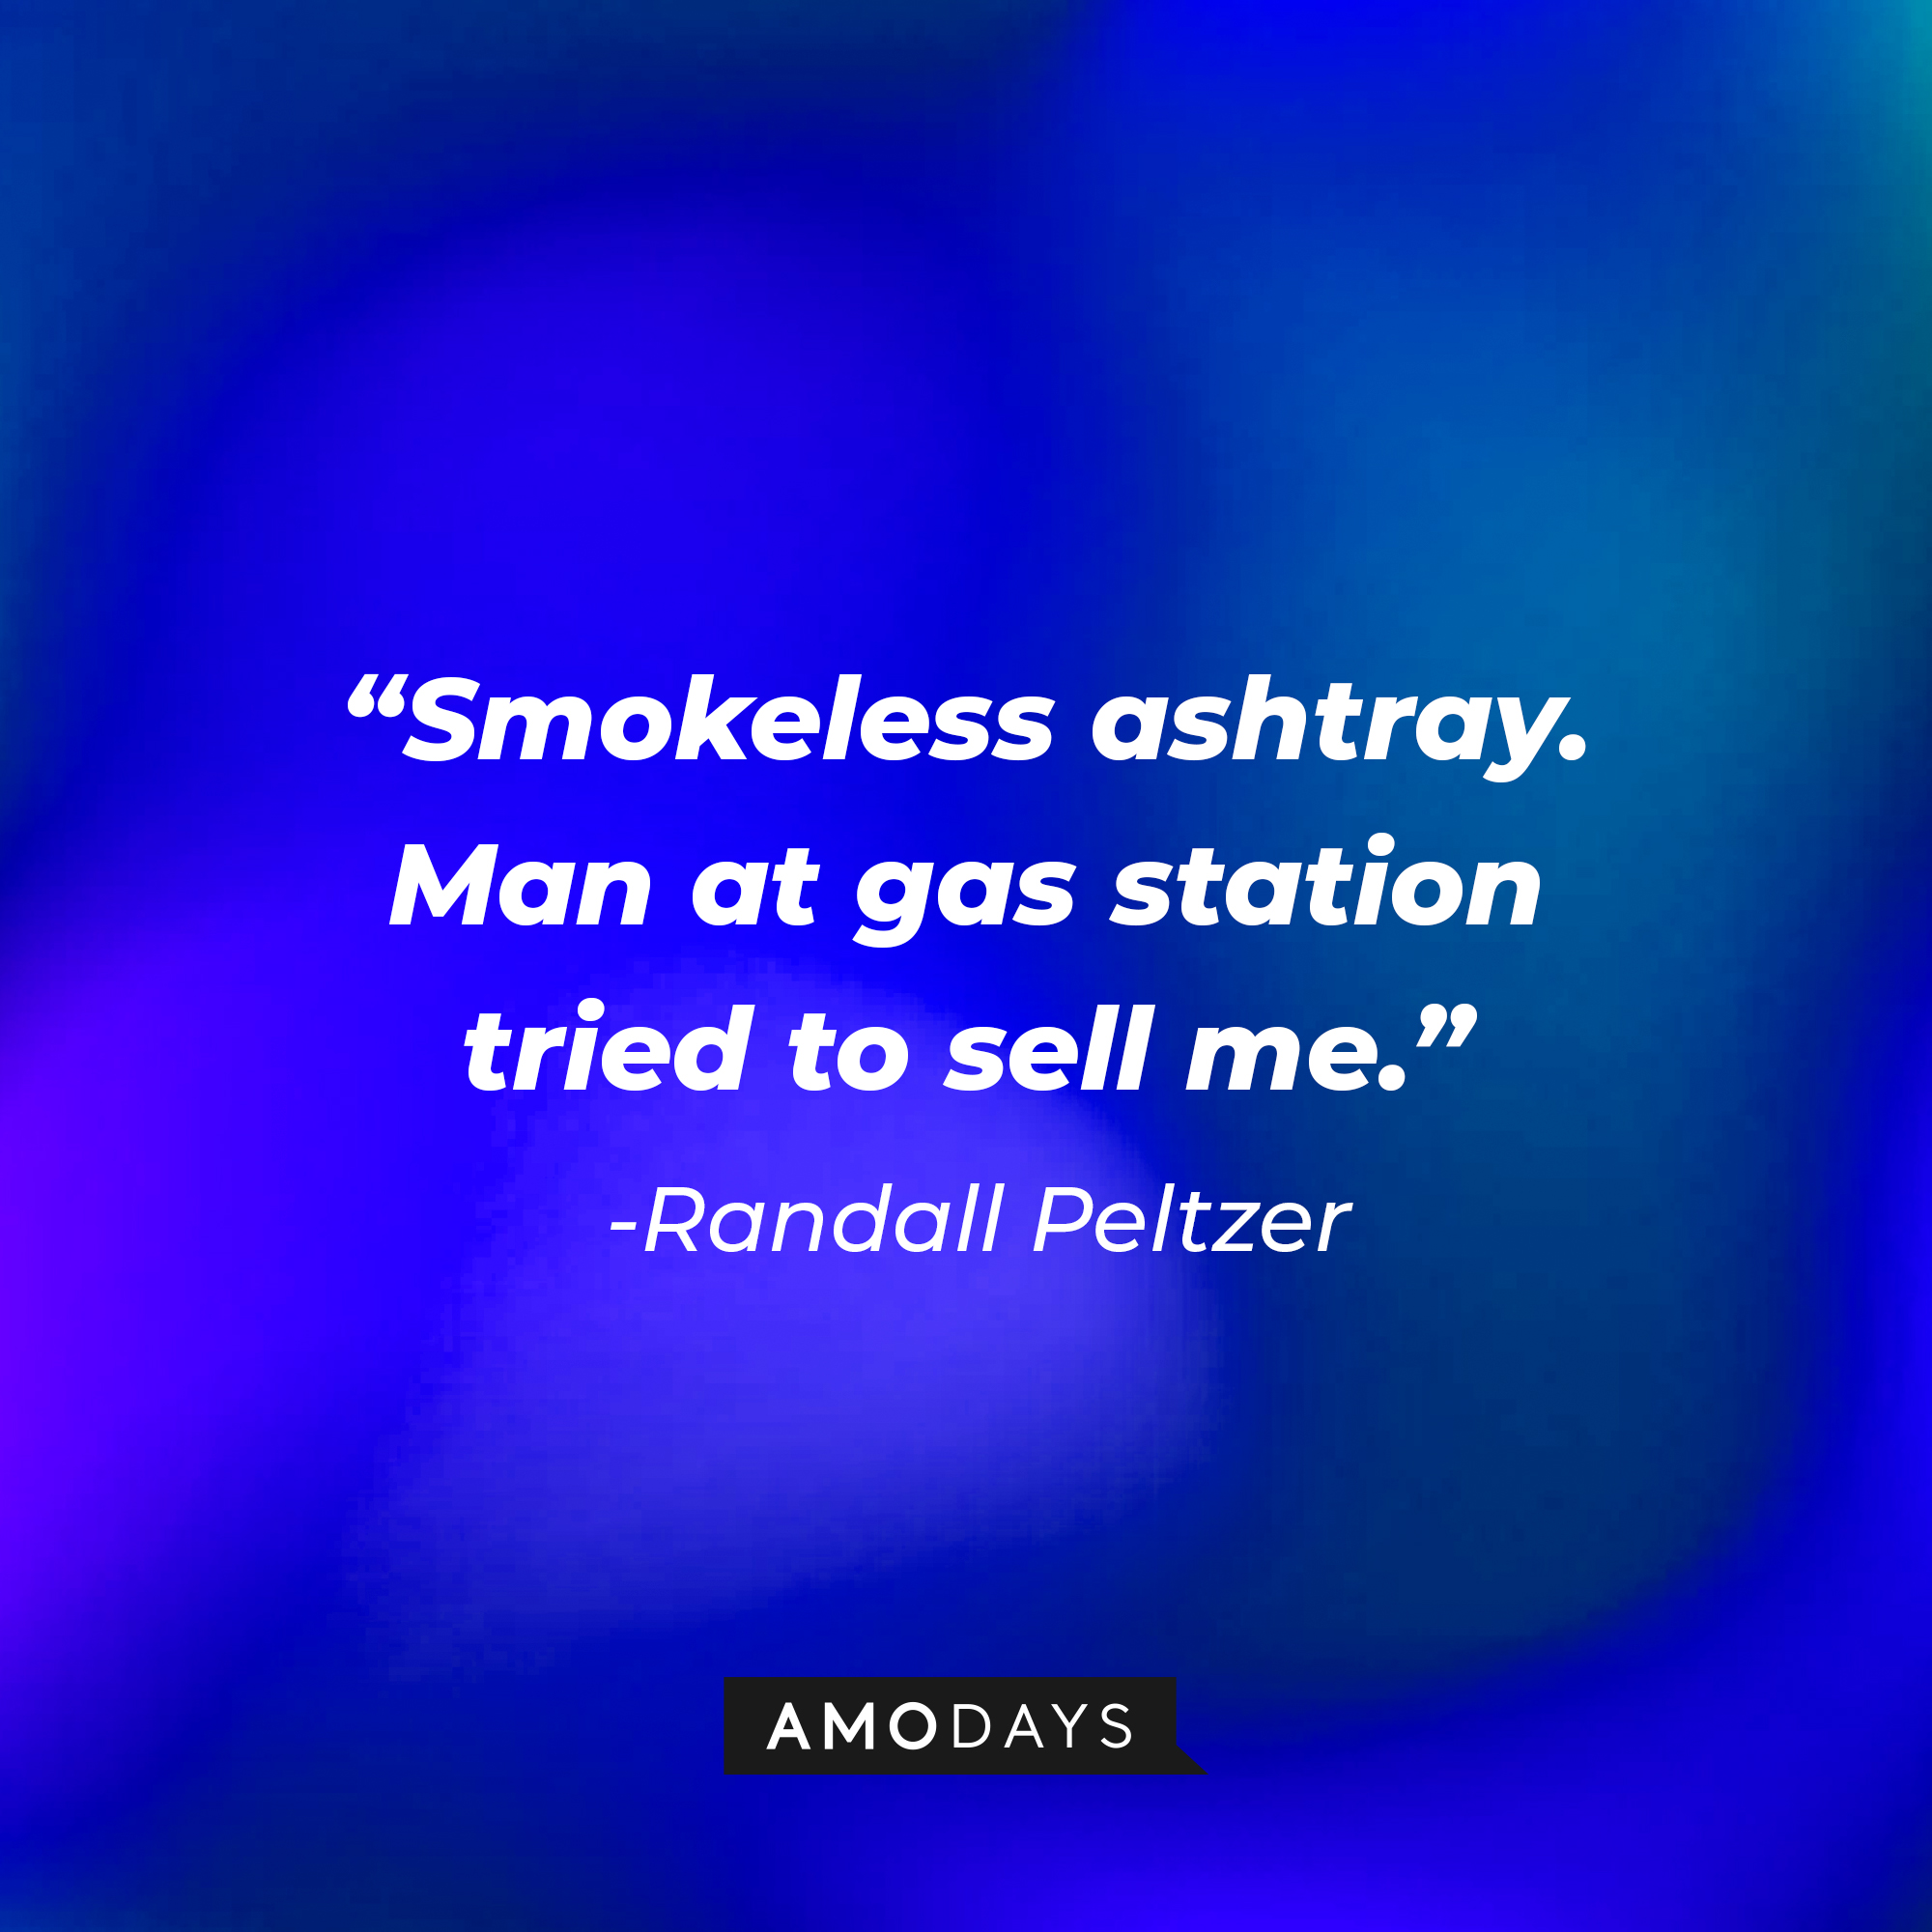 Randall Peltzer's quote: "Smokeless ashtray. Man at gas station tried to sell me." | Source: AmoDays